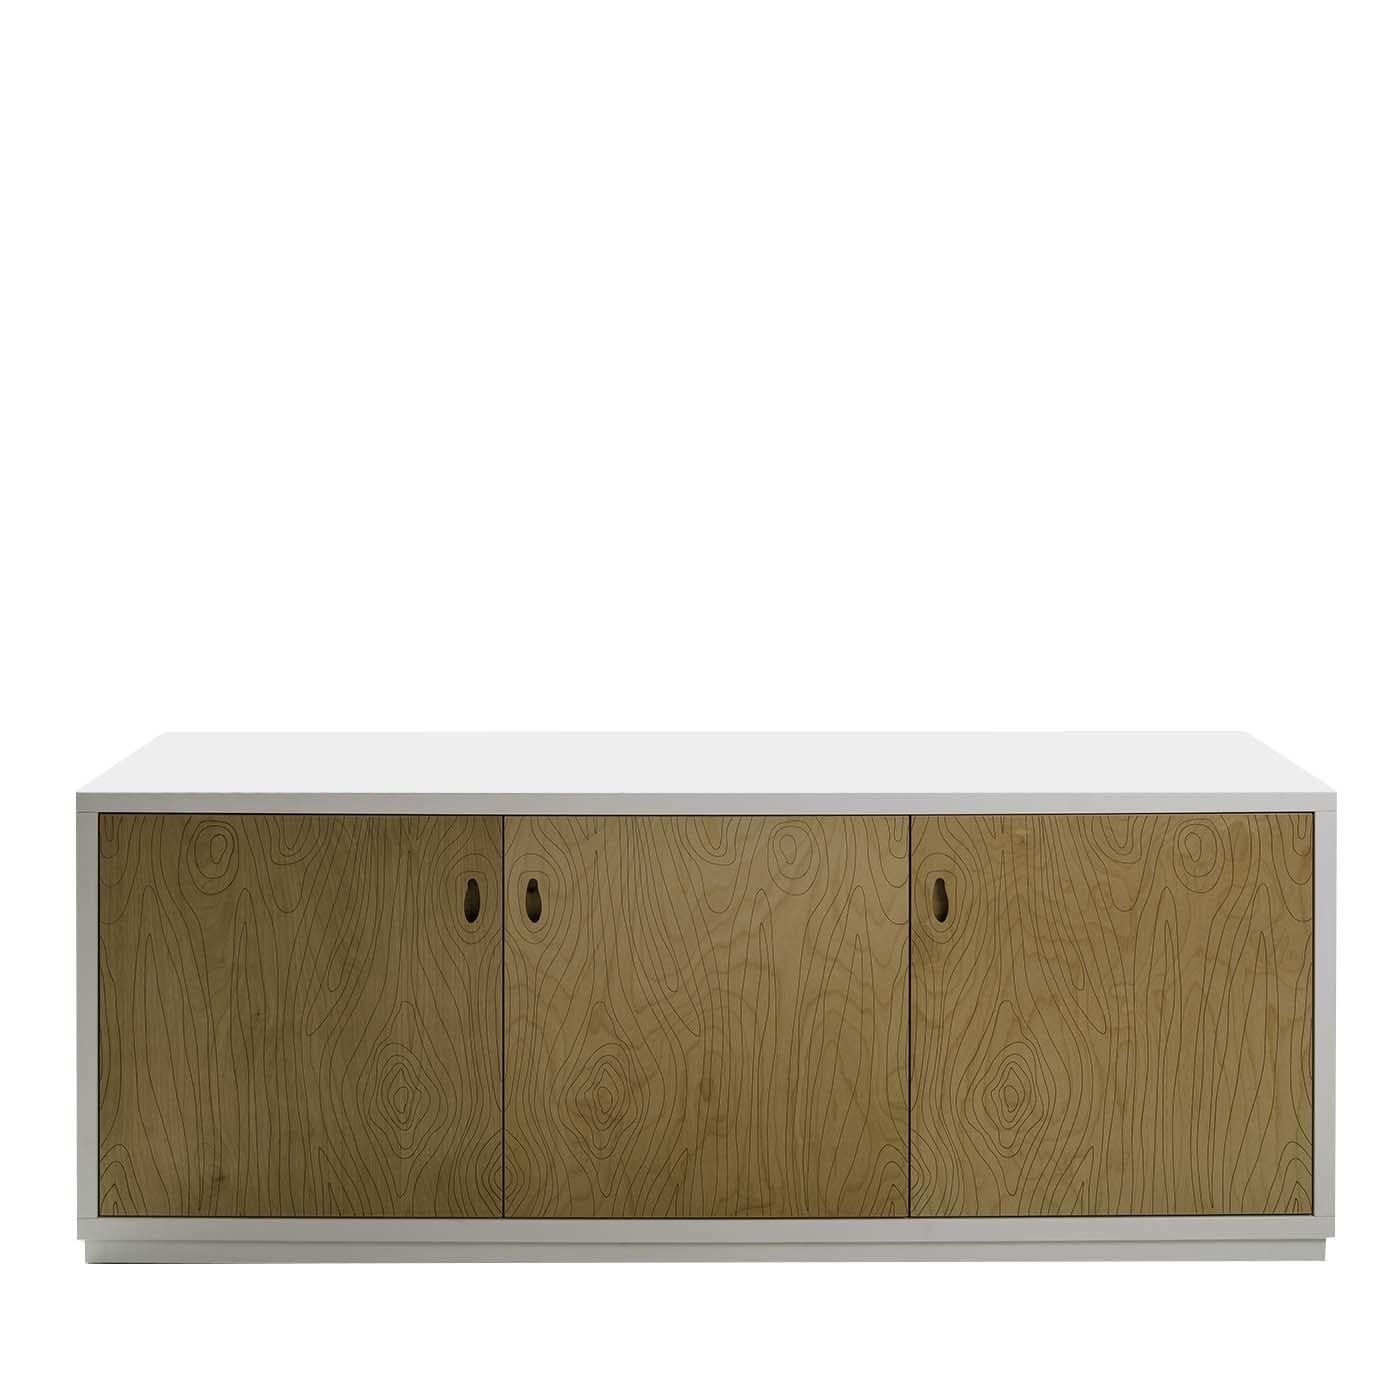 Linear and sophisticated, this modern sideboard is made of birch with a structure treated with white texturized lacquer both inside and out. The interior features three separate compartments individually divided by shelves to create a versatile